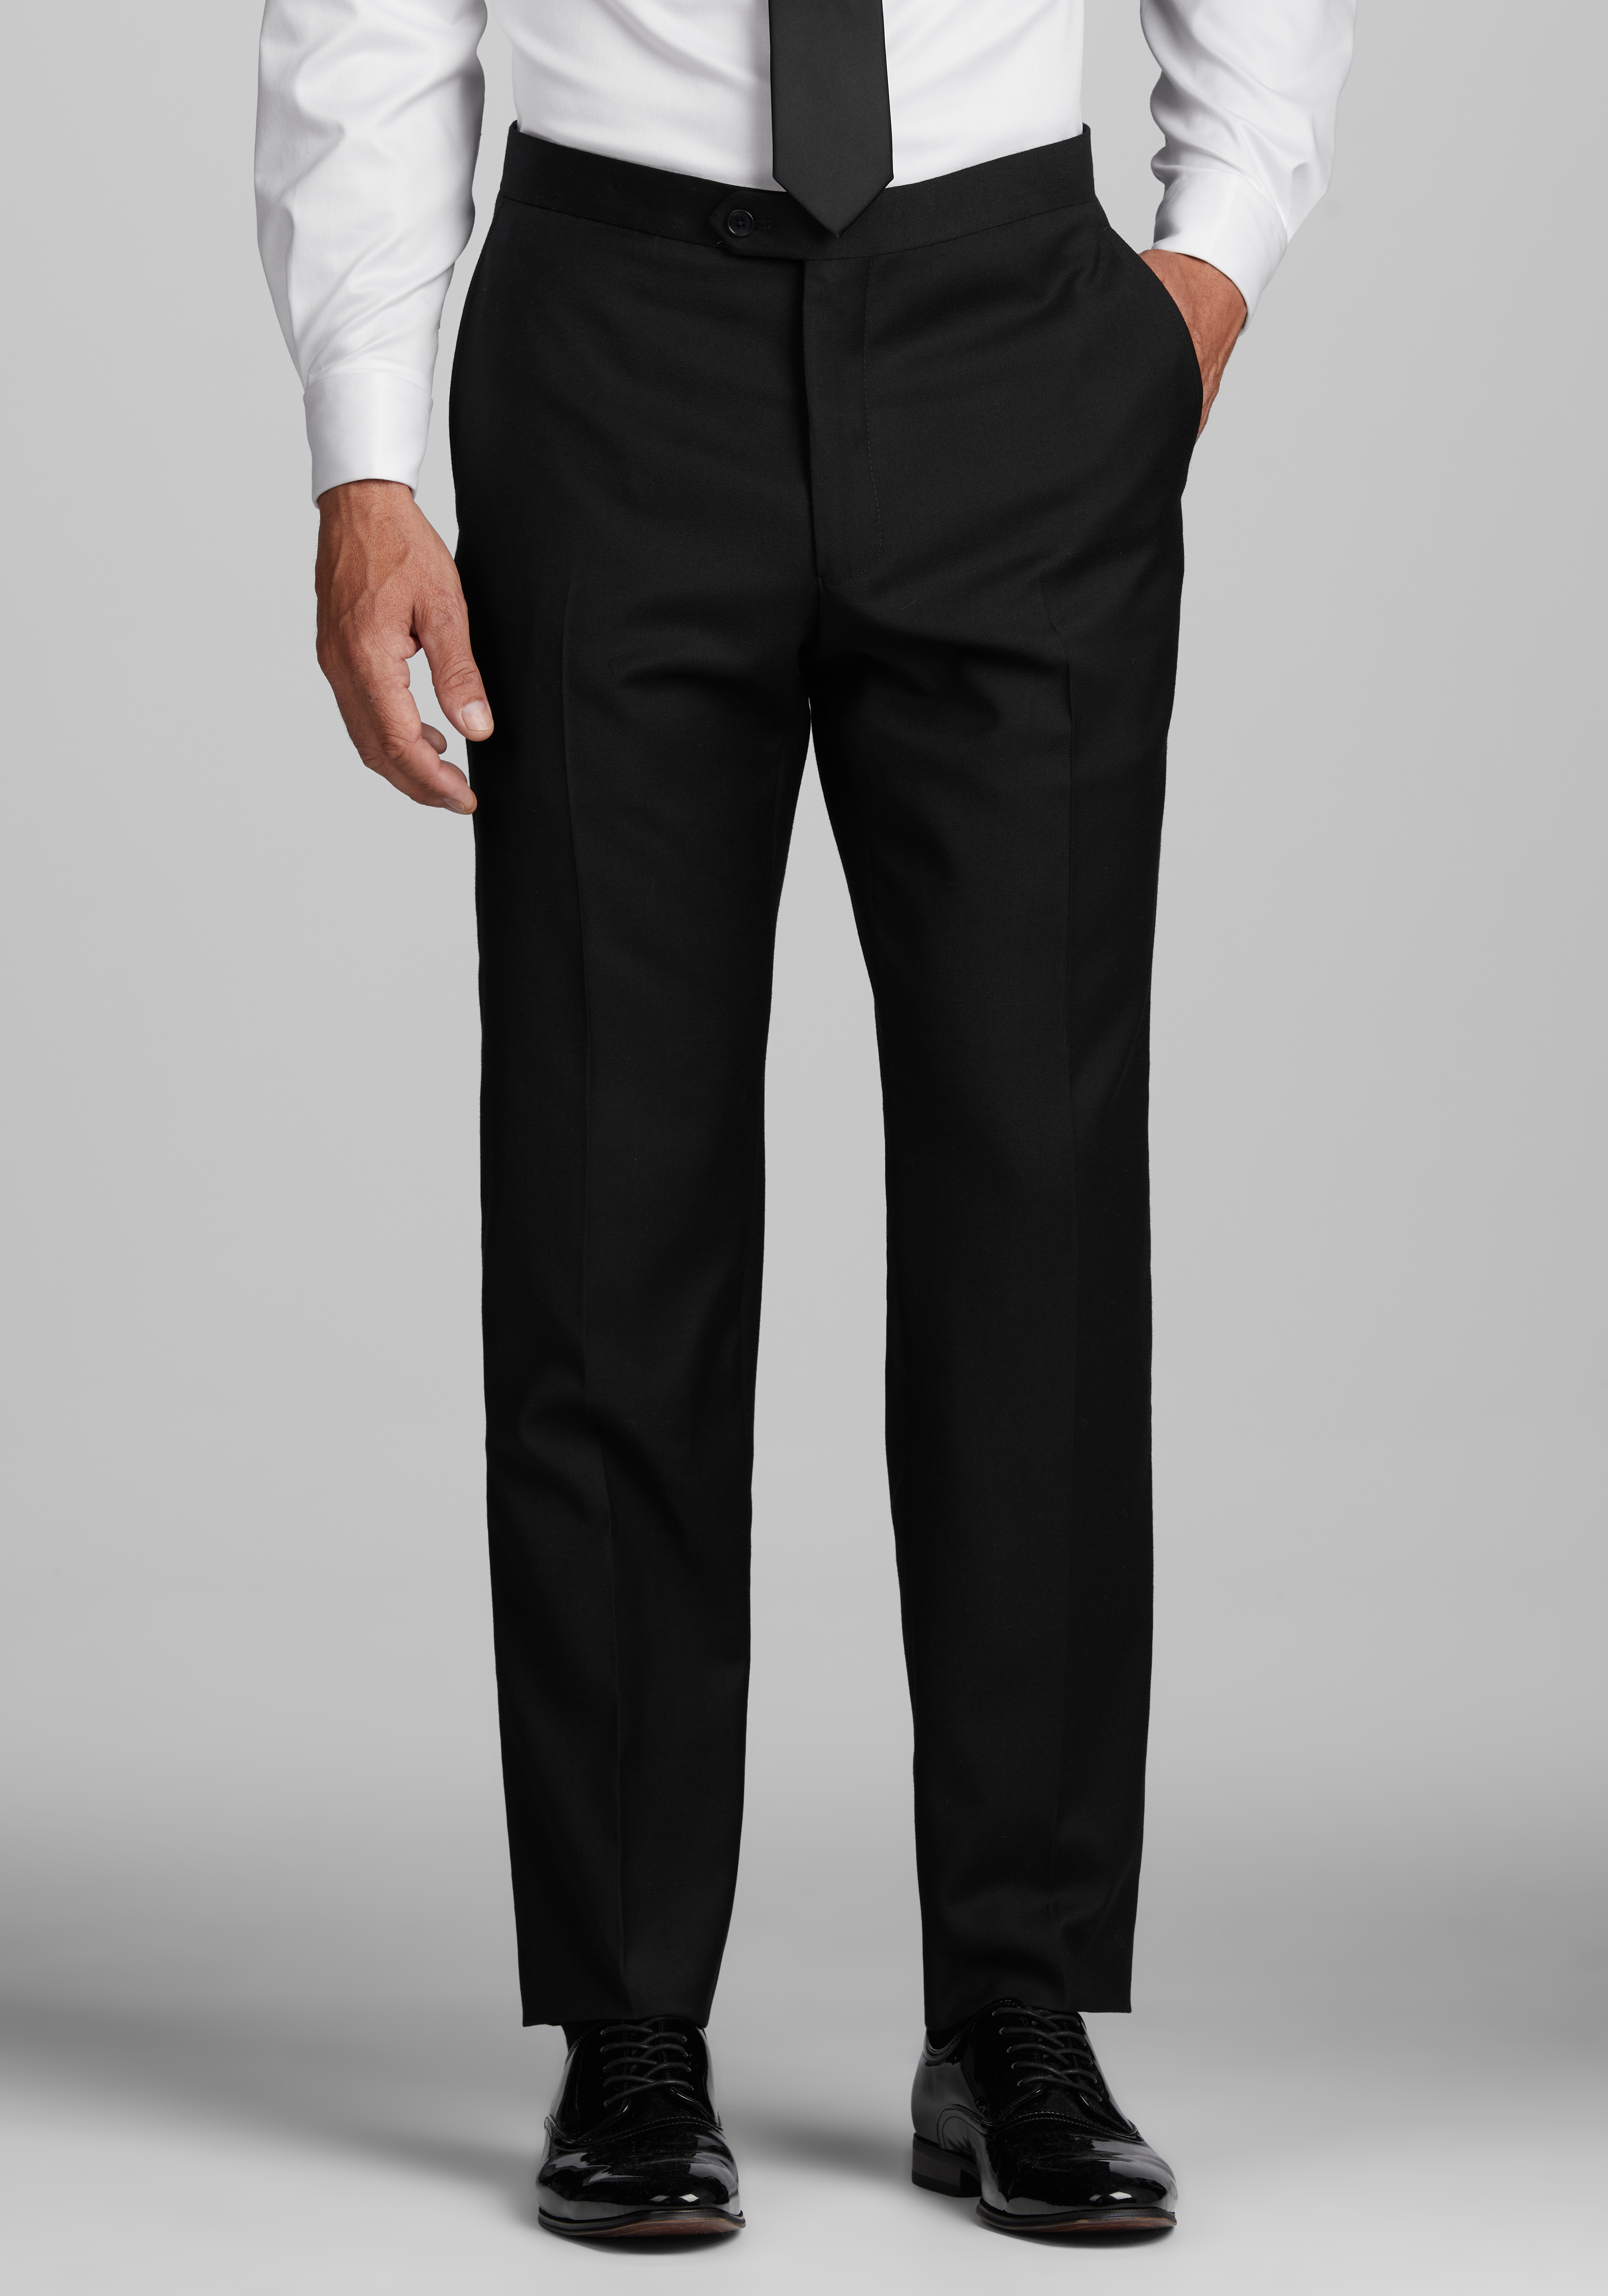 Tuxedo Ankle Pants with Duchess Satin Side Panel and Matching